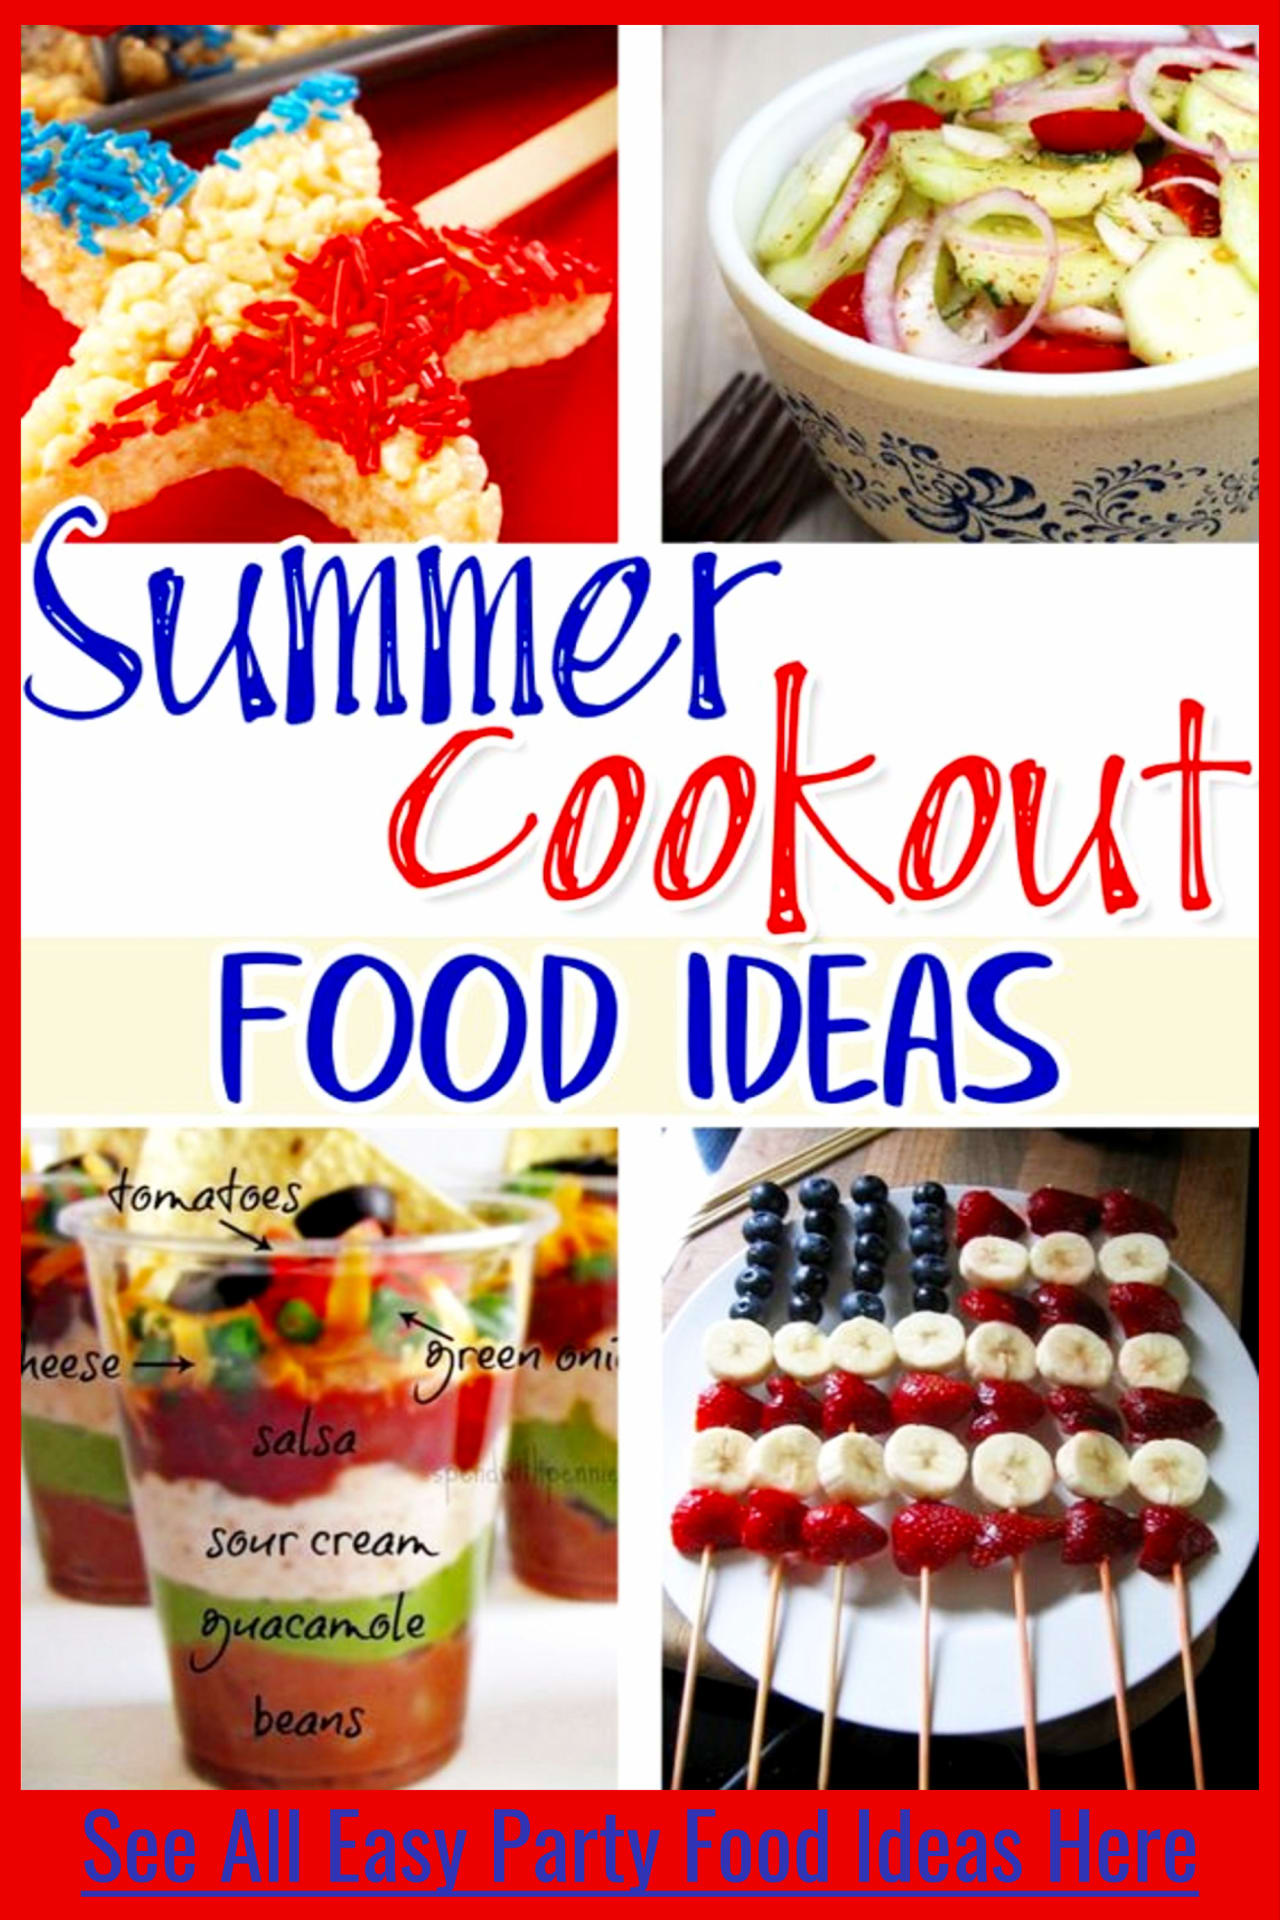 4th of July potluck party food ideas for a crowd - easy backyard cookout food ideas for a 4th of July party, picnic or any outdoor summer party